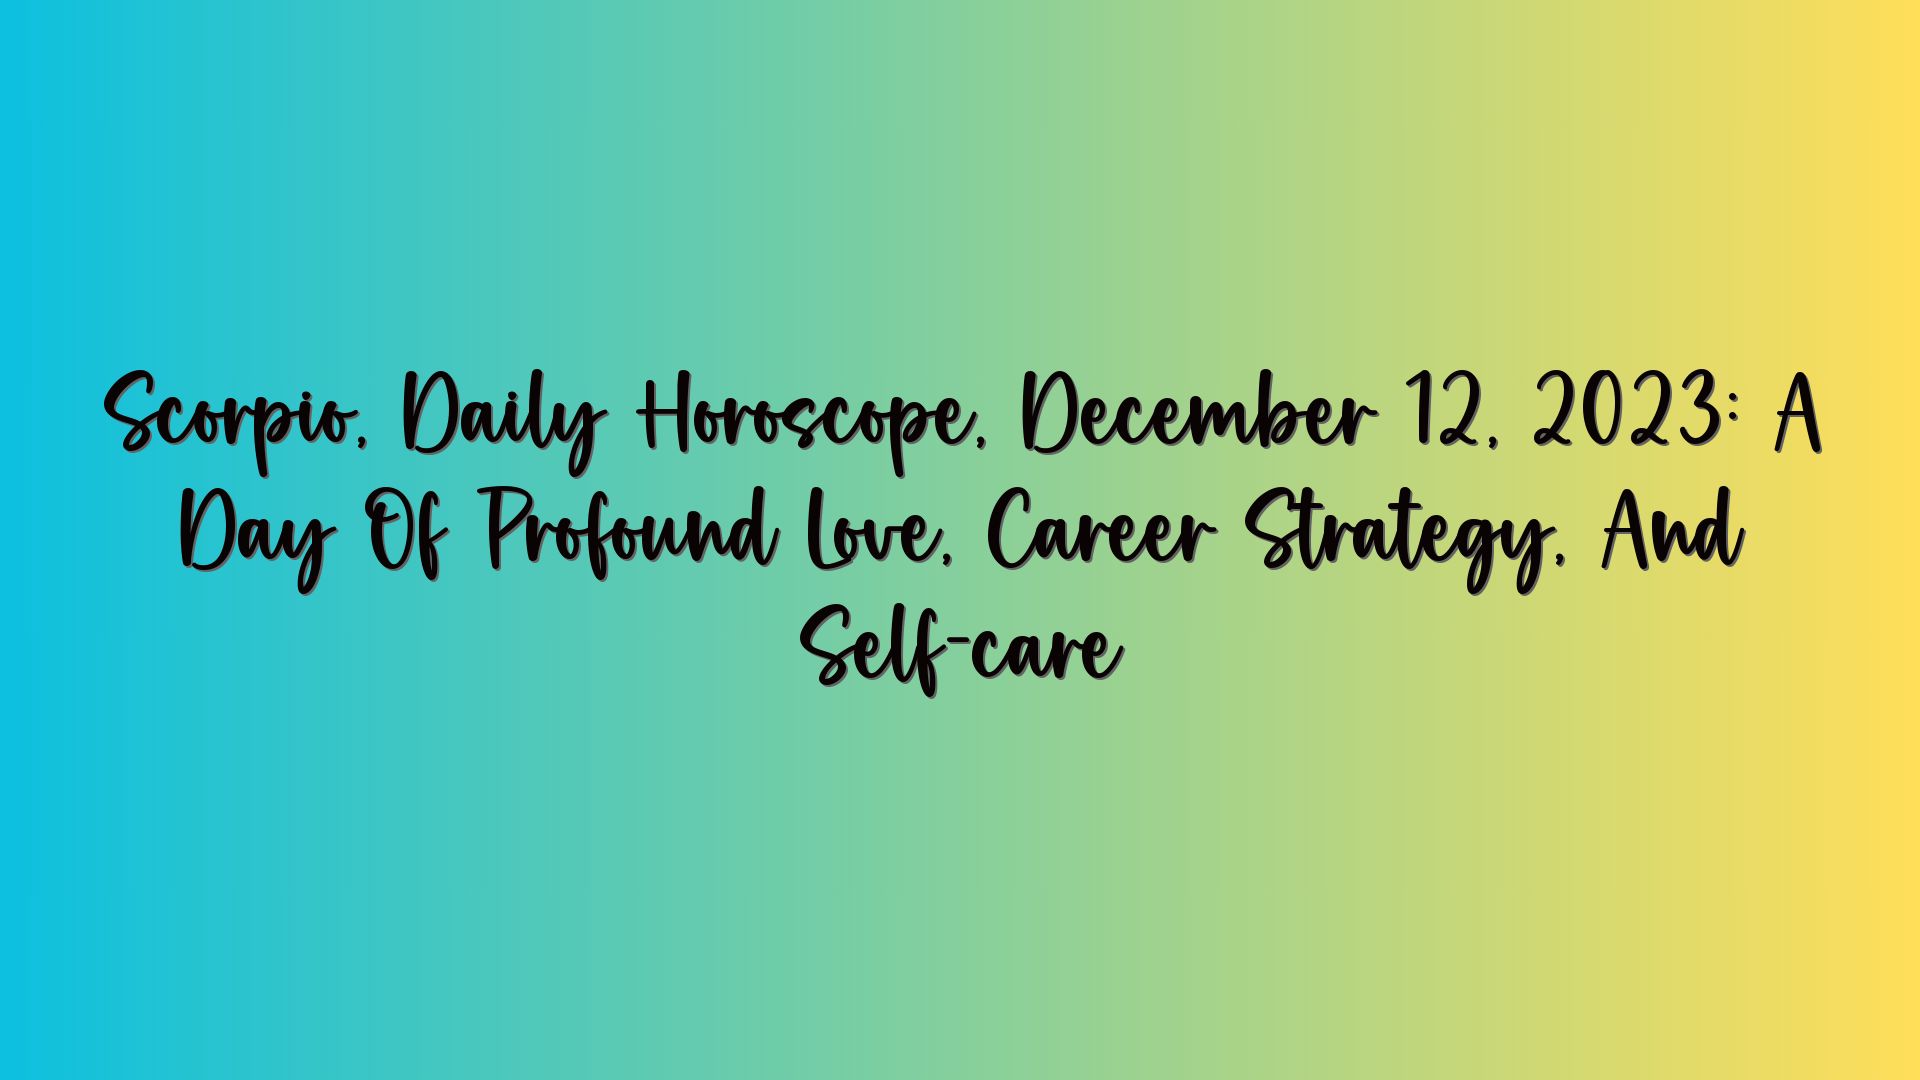 Scorpio, Daily Horoscope, December 12, 2023: A Day Of Profound Love, Career Strategy, And Self-care